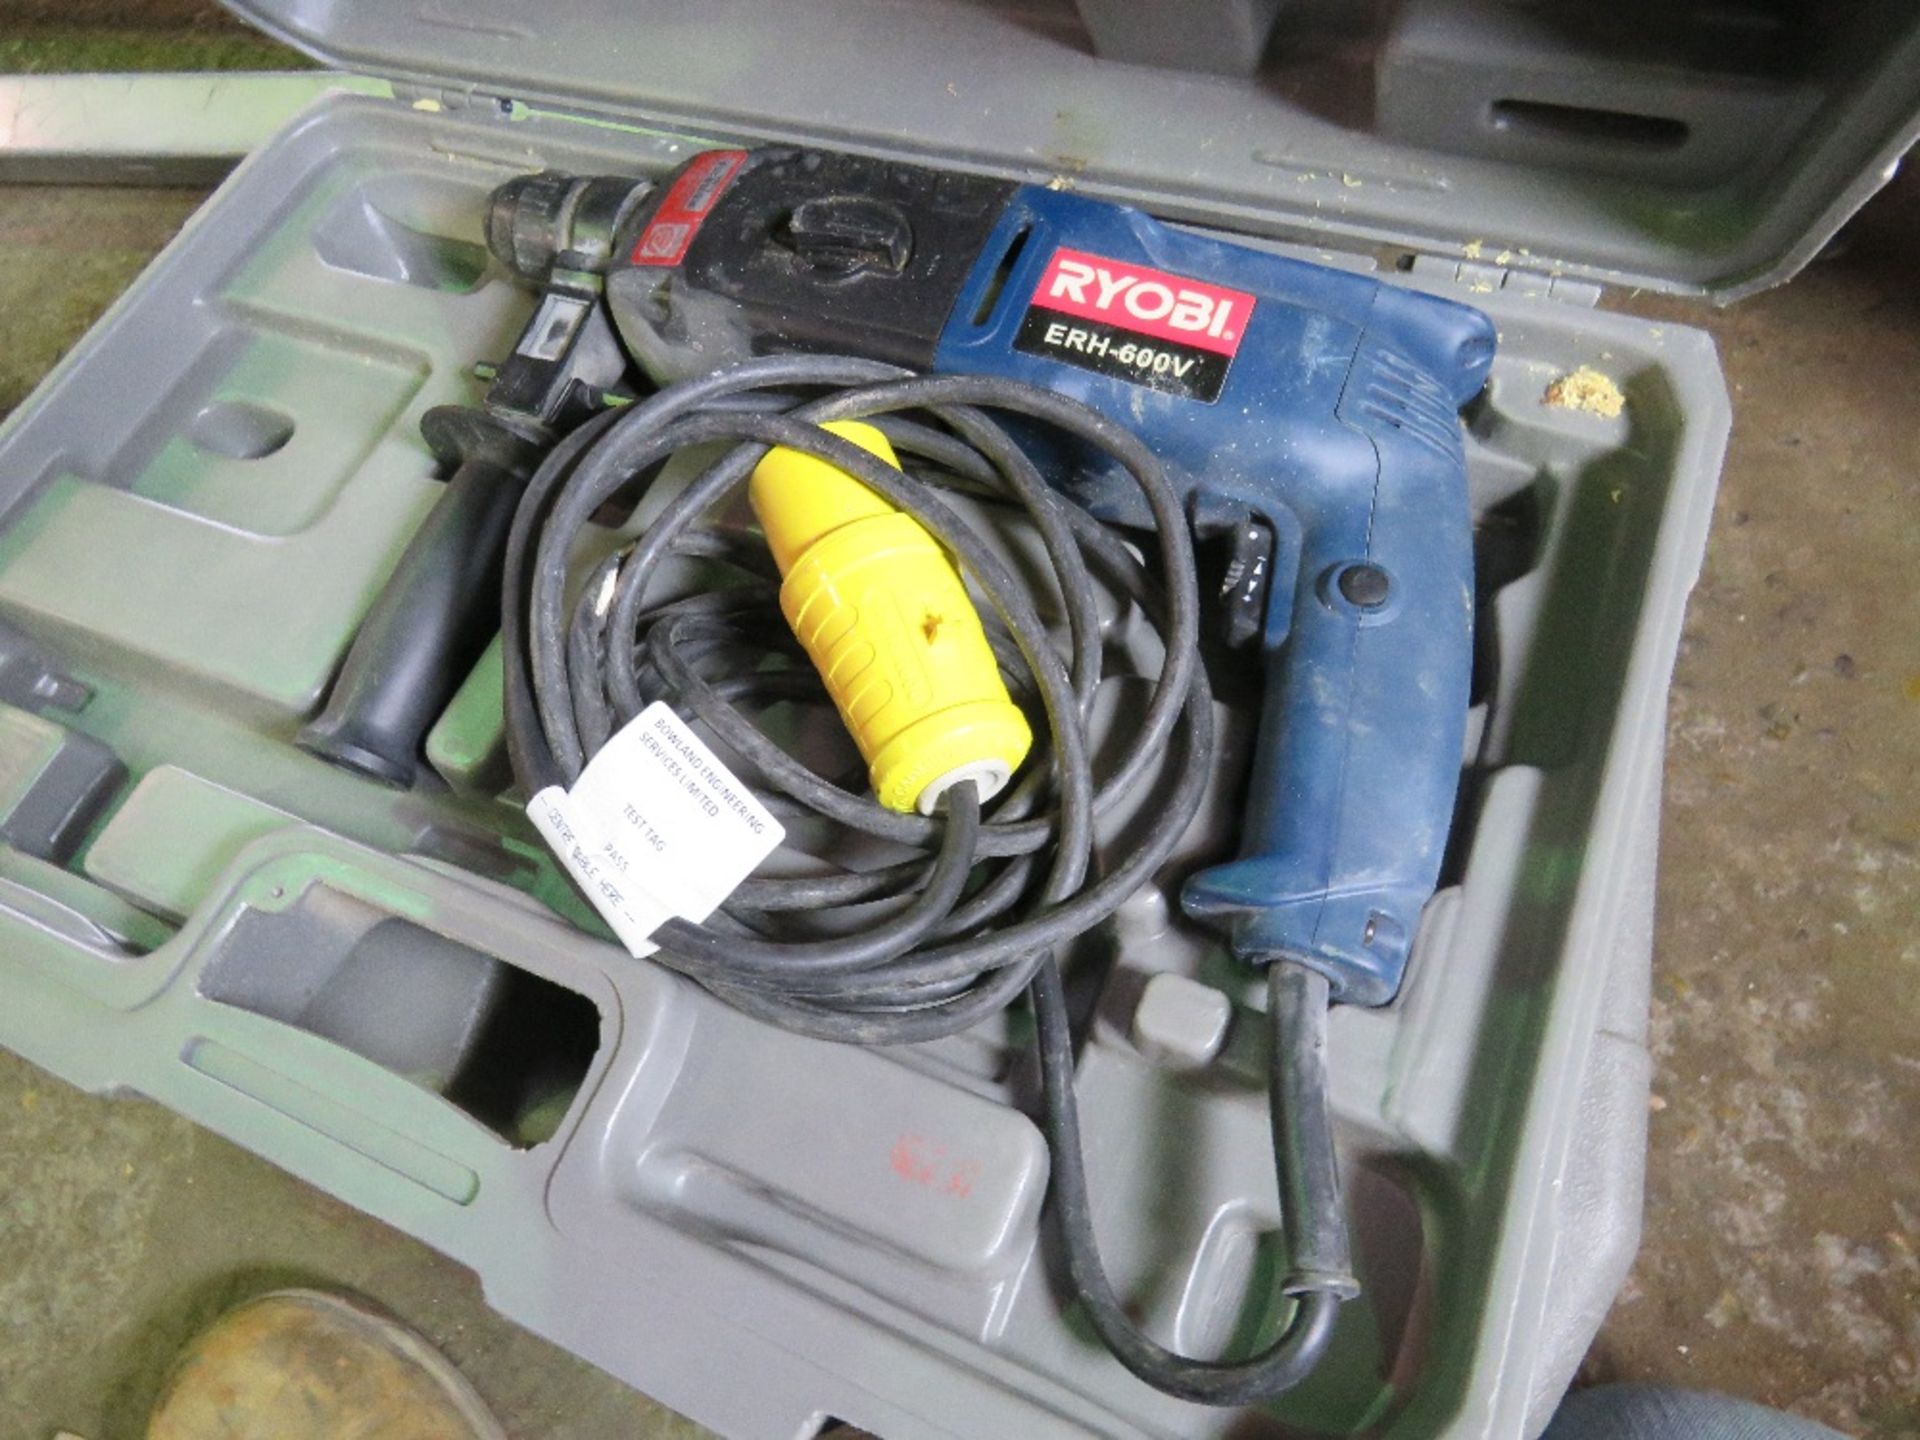 3 X RYOBI SDS 110 VOLT DRILLS. SOURCED FROM DEPOT CLEARANCE DUE TO A CHANGE IN COMPANY POLICY. - Image 3 of 4